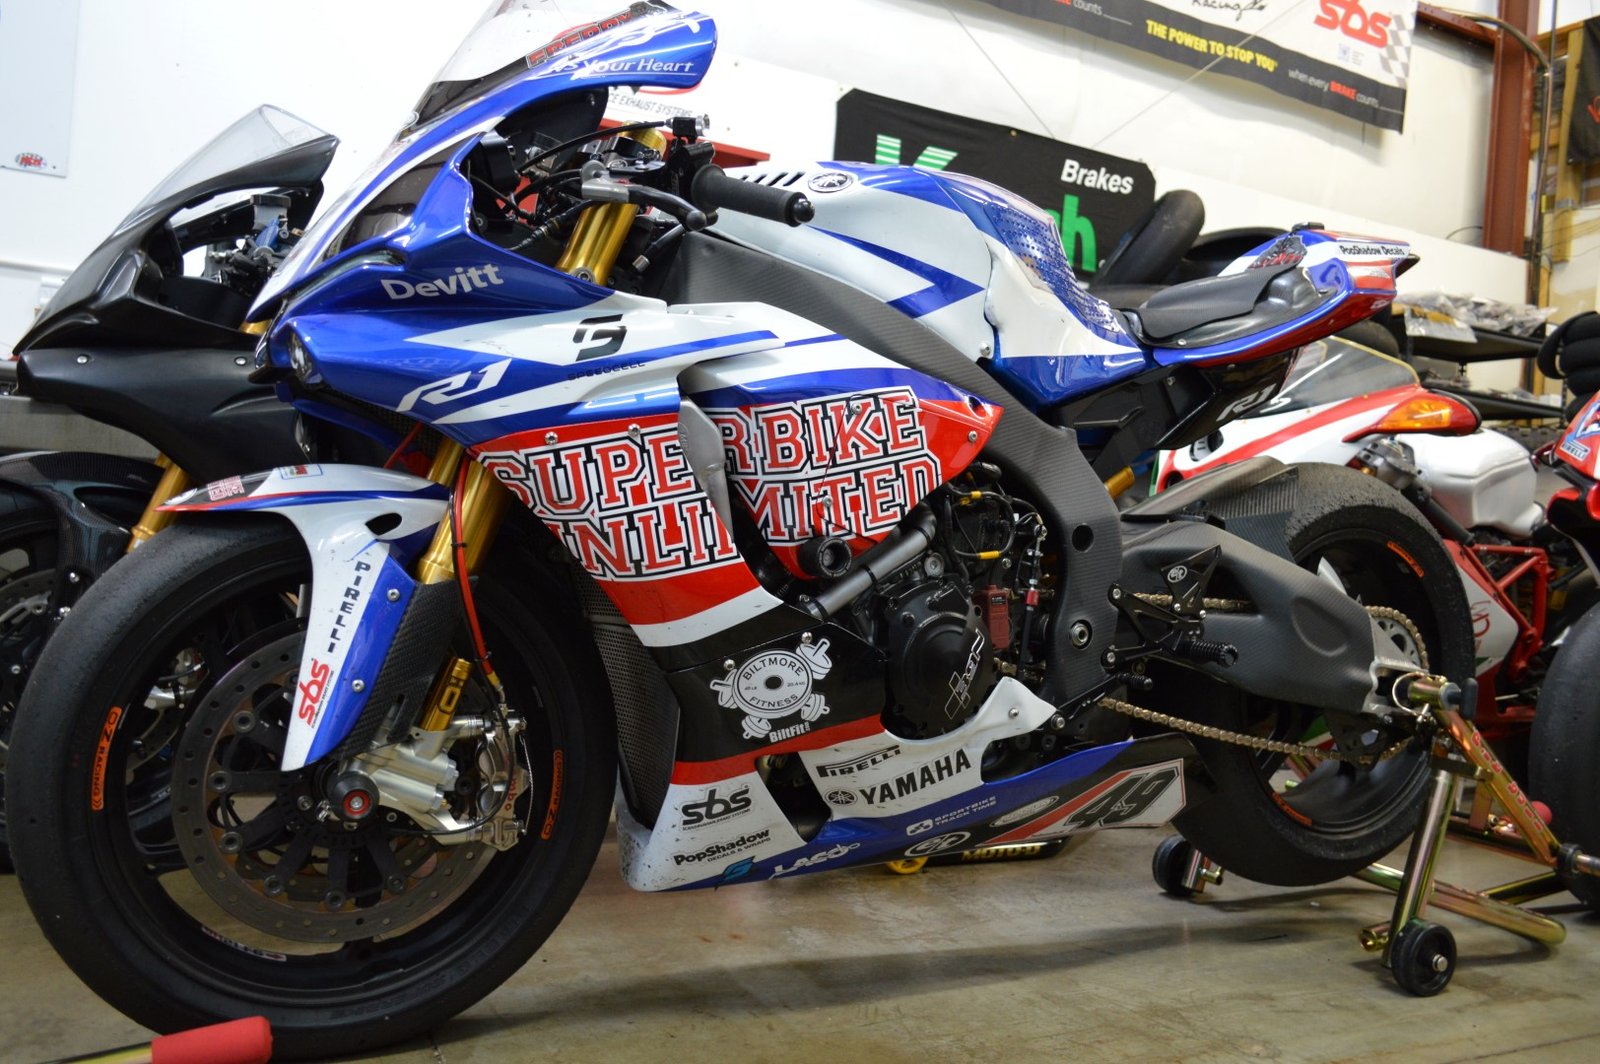 Featured Listing: 2016 Yamaha YZF-R1 Factory BSB Superbike for Sale